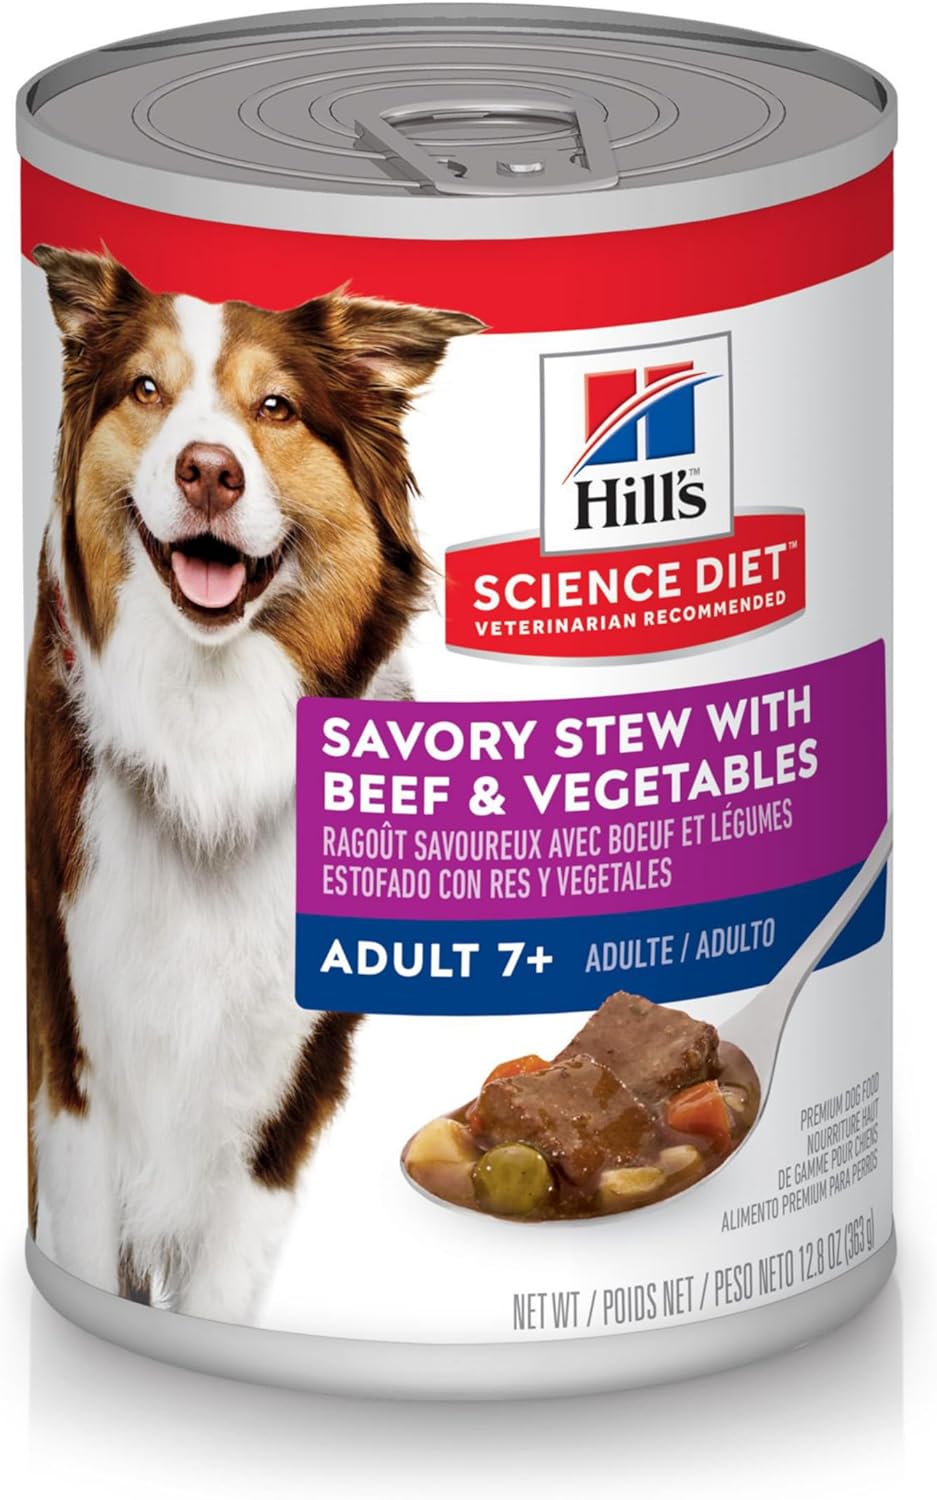 Hill's Science Diet Adult 7+, Senior Adult 7+ Premium Nutrition, Wet Dog Food, Beef & Vegetables Stew, 12.8 oz Can, Case of 12